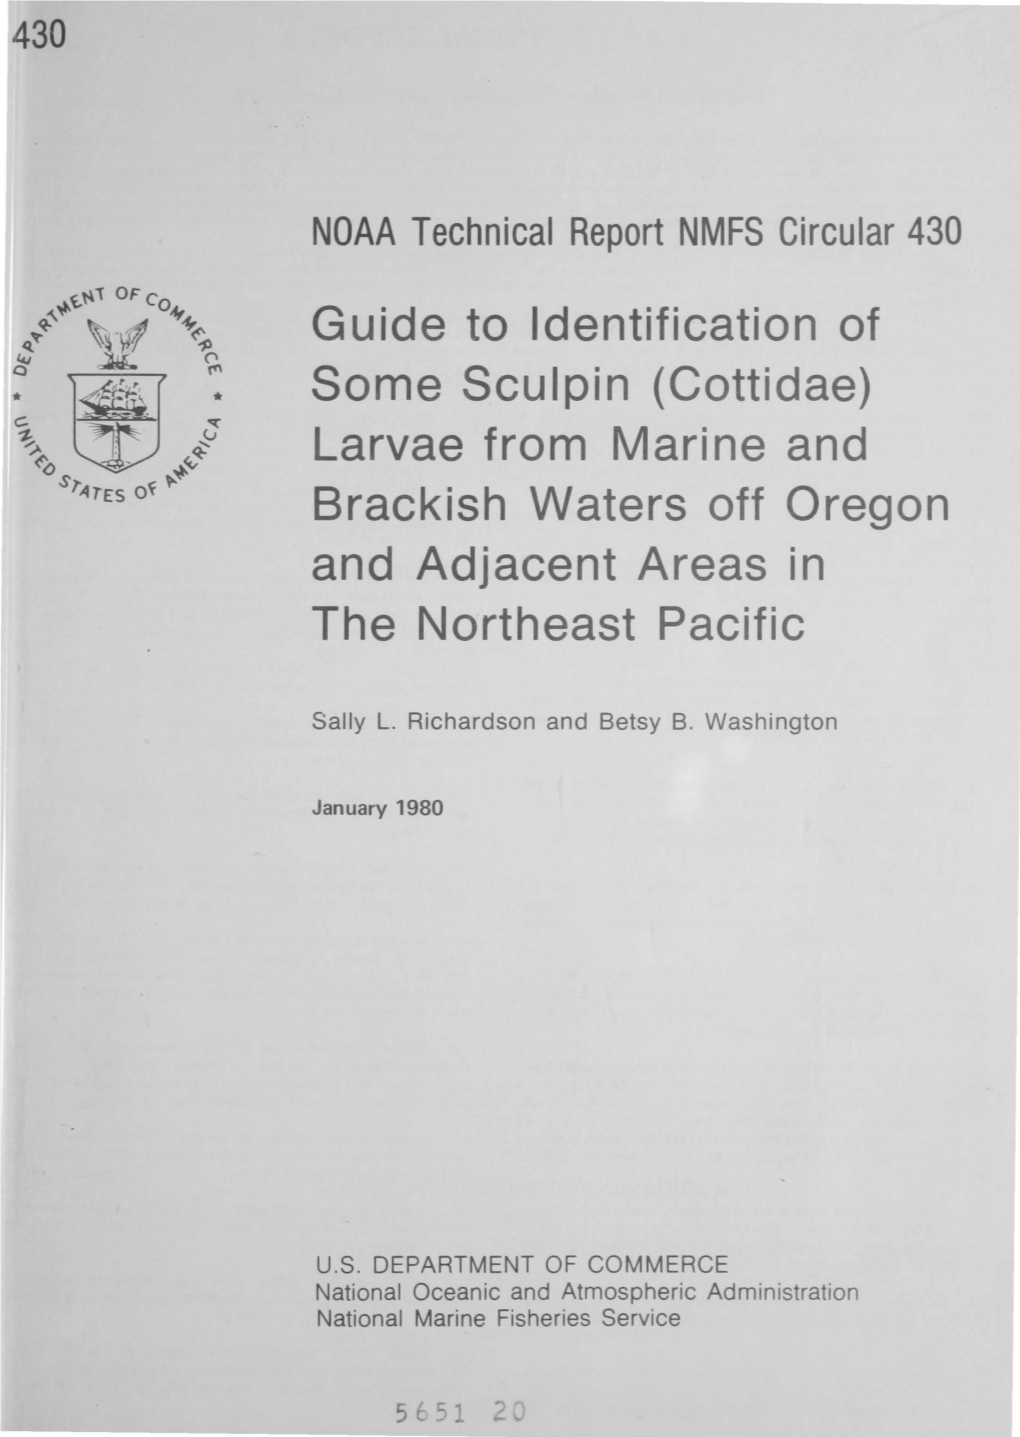 Guide to Identification of Some Sculpin (Cottidae) Larvae from Marine and Brackish Waters Off Oregon and Adjacent Areas in the Northeast Pacific